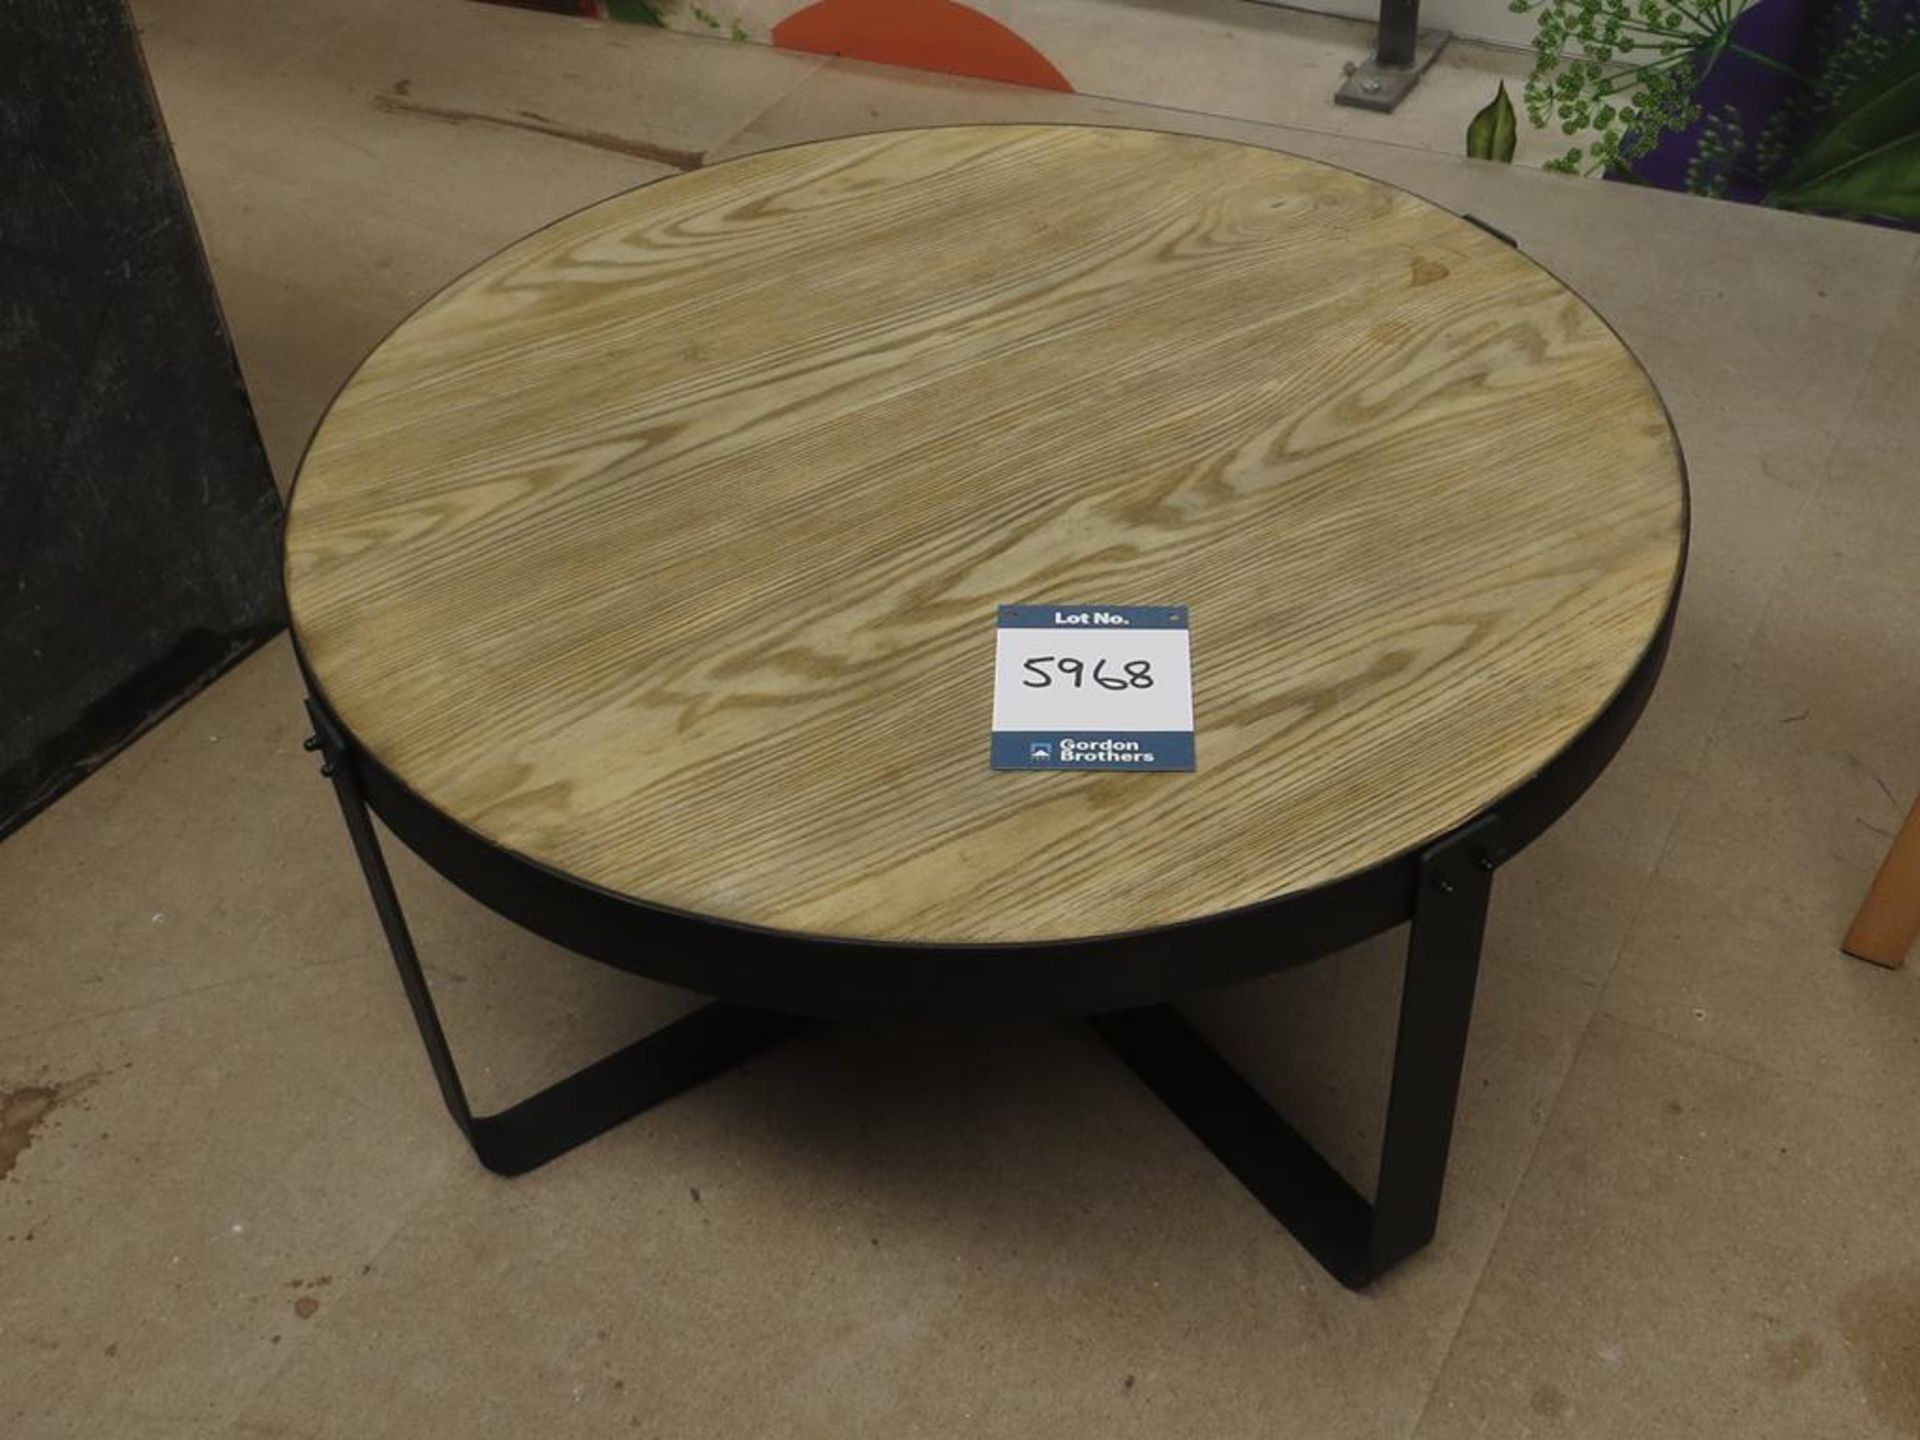 4x No. round coffee table, black steel/wood: MCL C